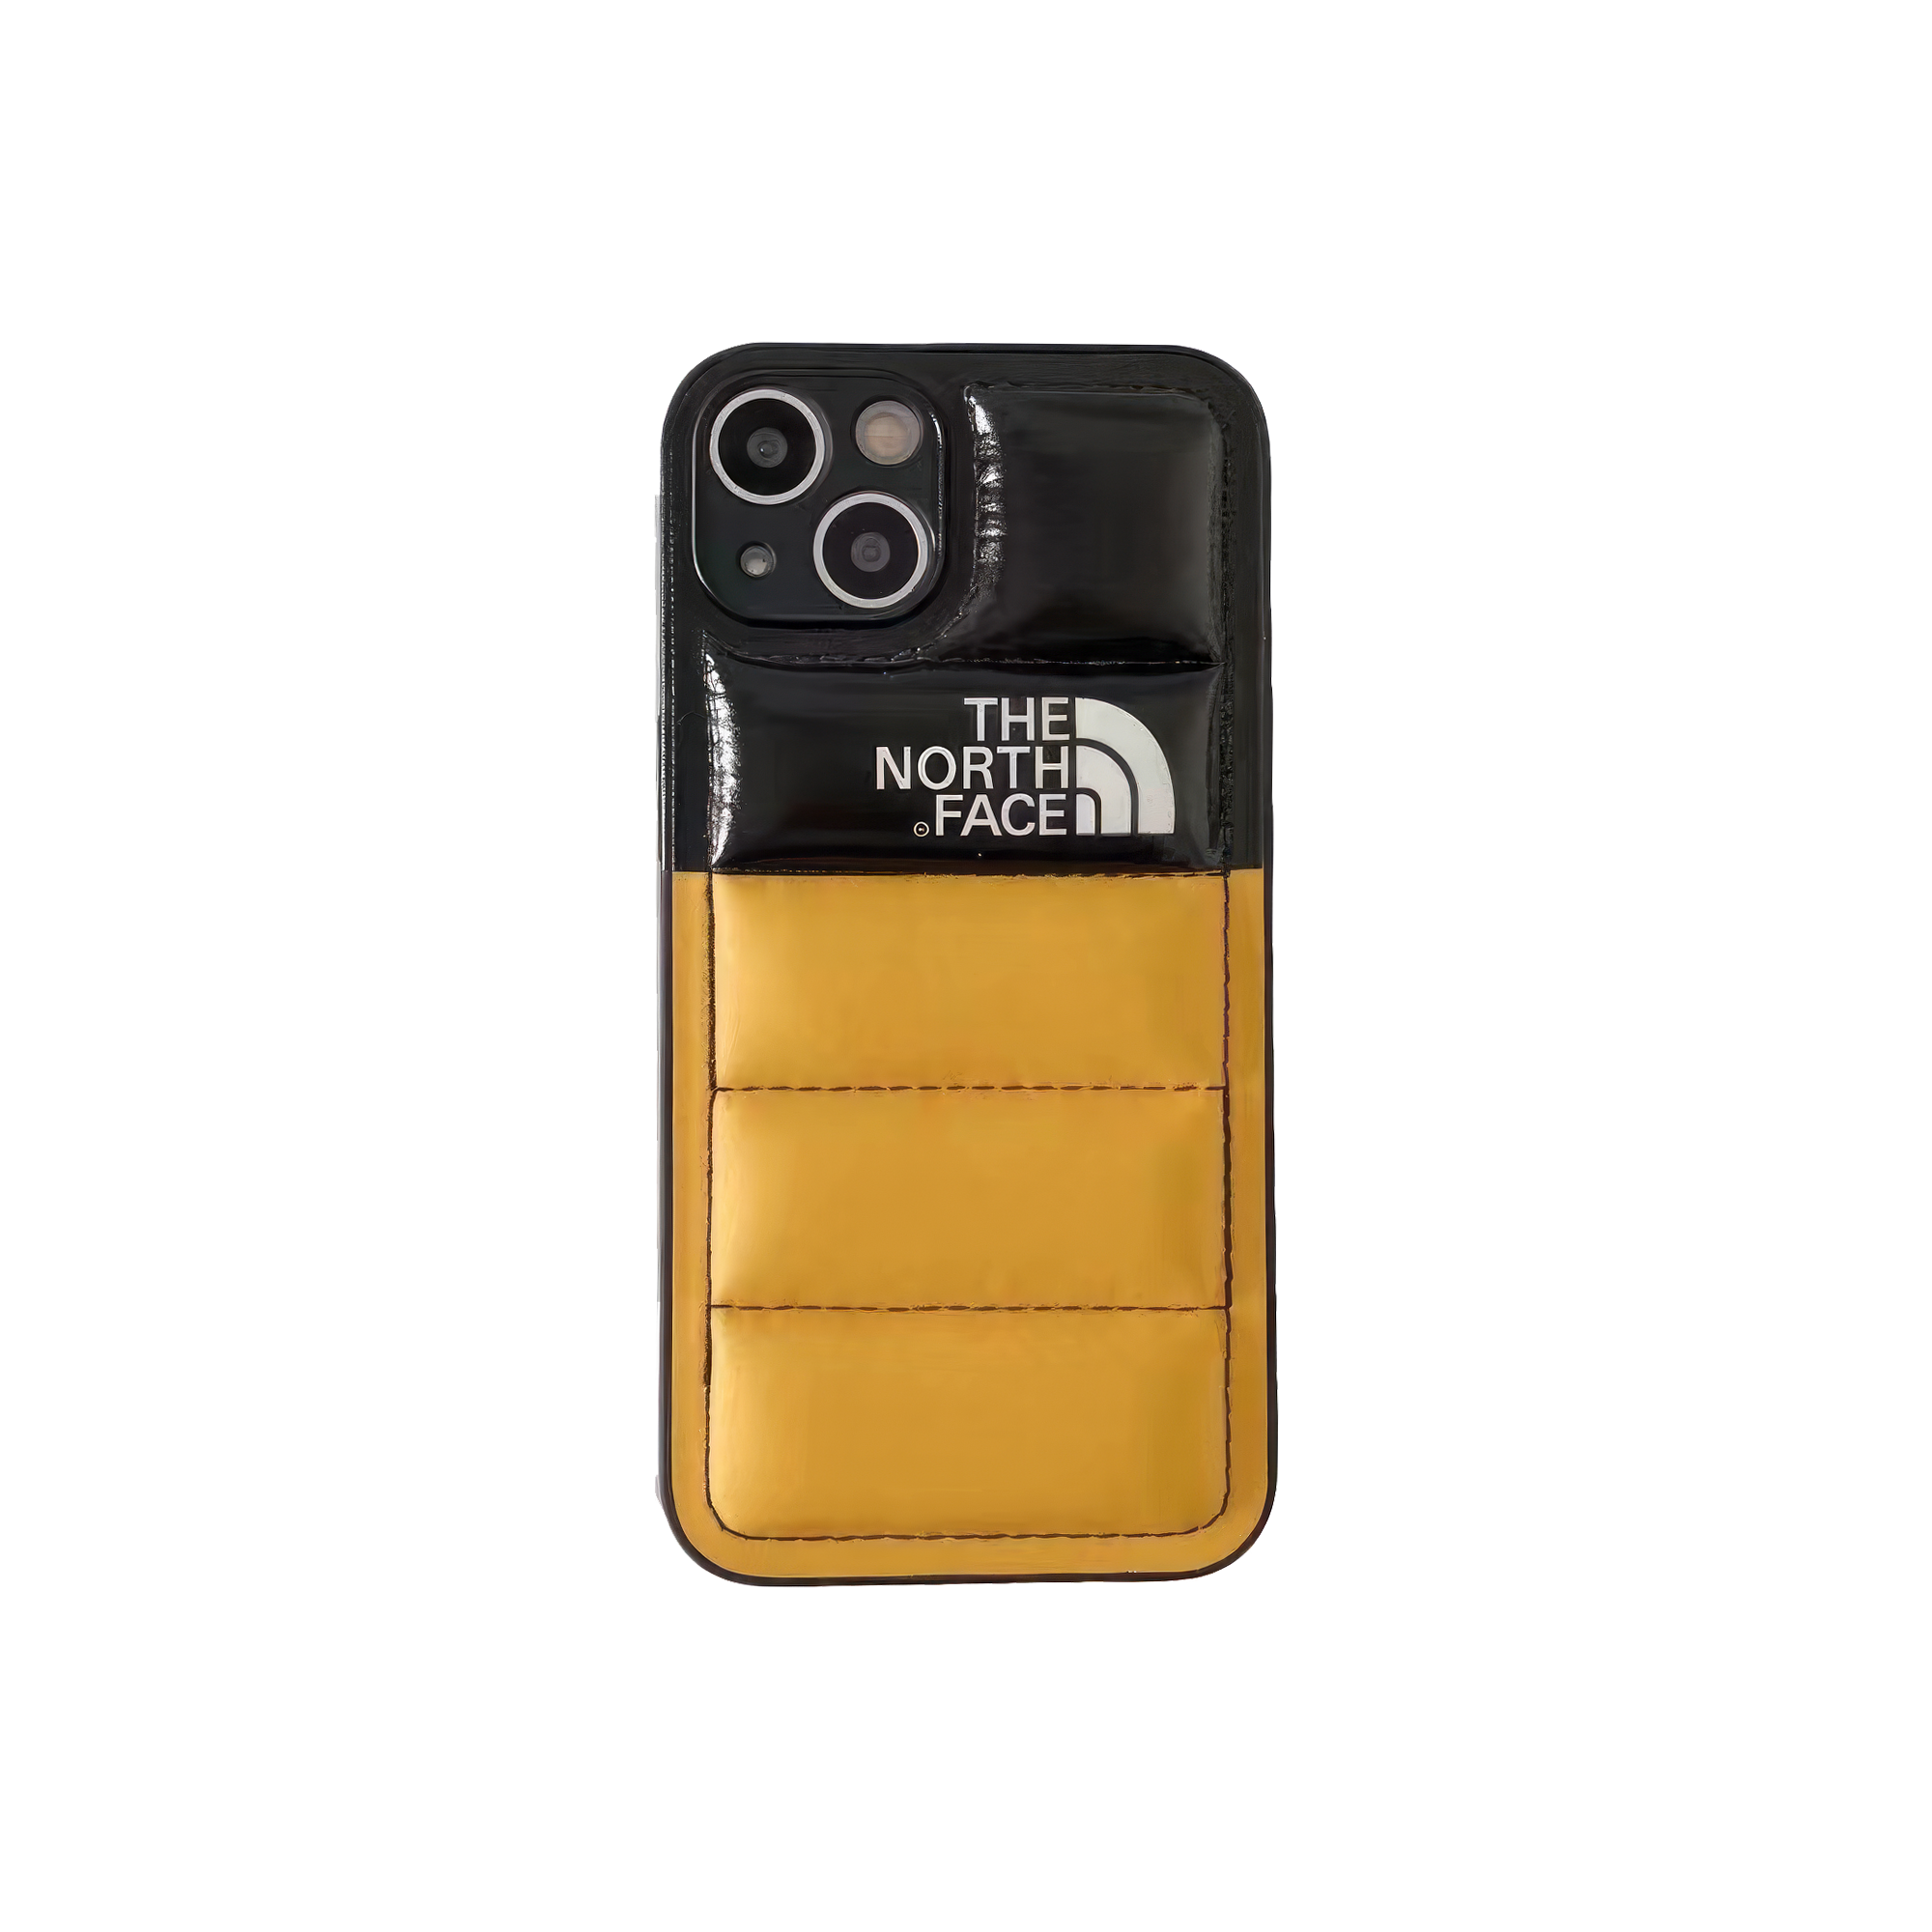 The North Face yellow latex durable smartphone case.